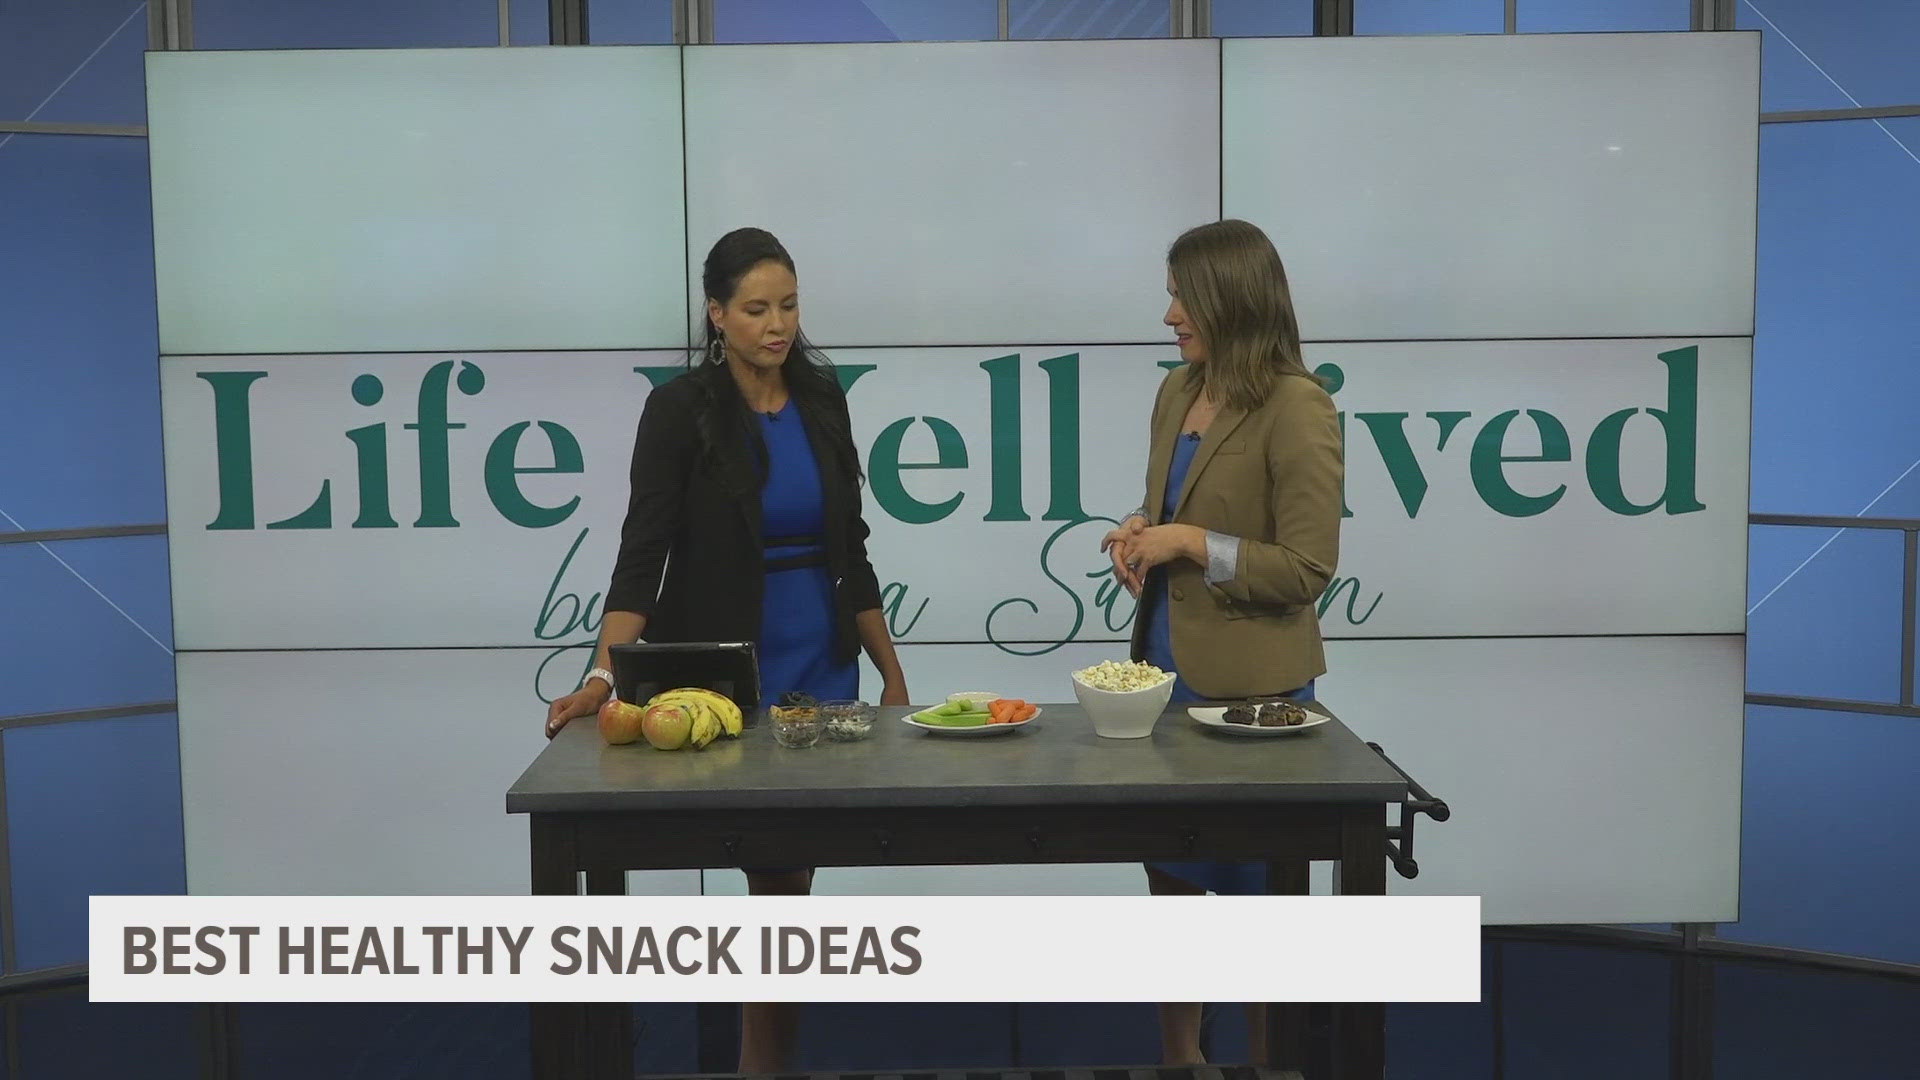 Nutritionist Kara Swanson of Life Well Lived shares some salty, sweet and crunch snack ideas to get you through the work day.